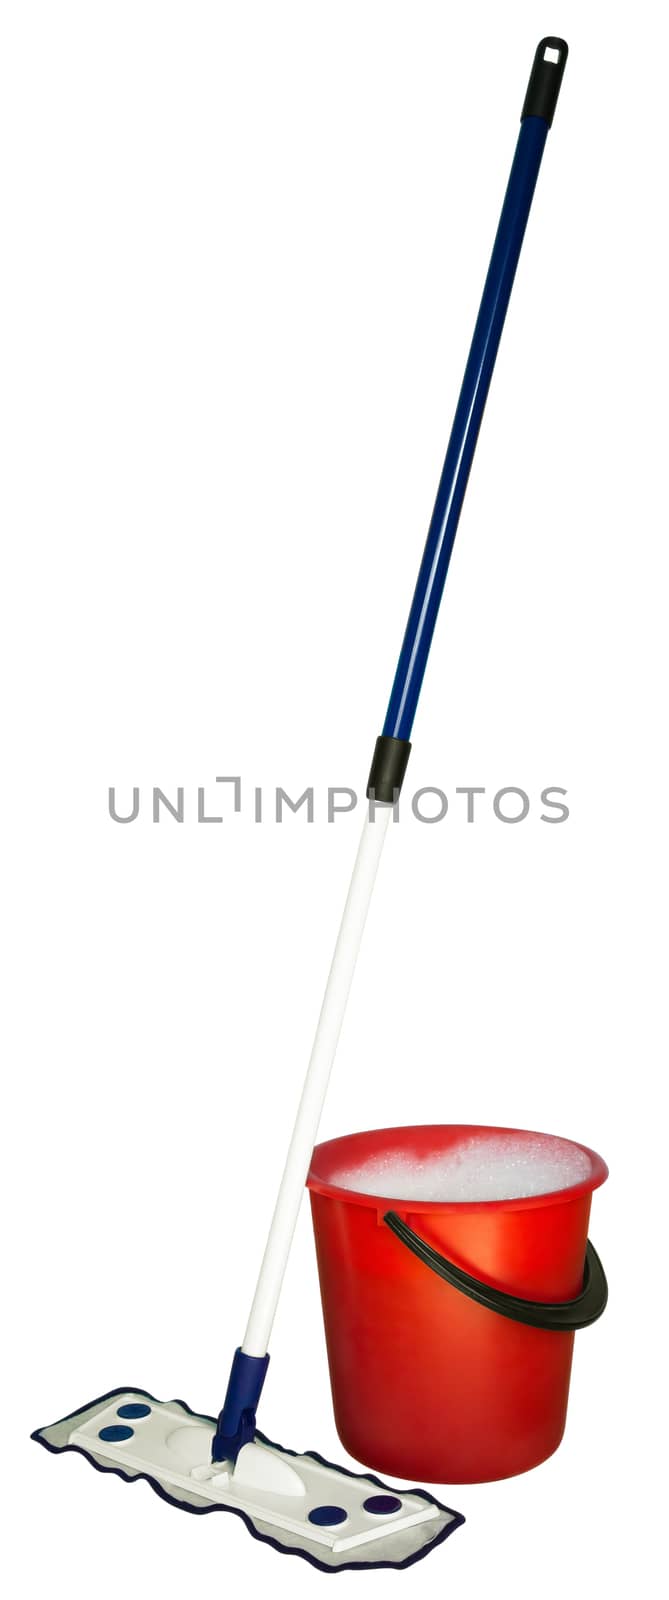 Red plastic bucket  with suds and mop isolated on white background. Clipping path includes.